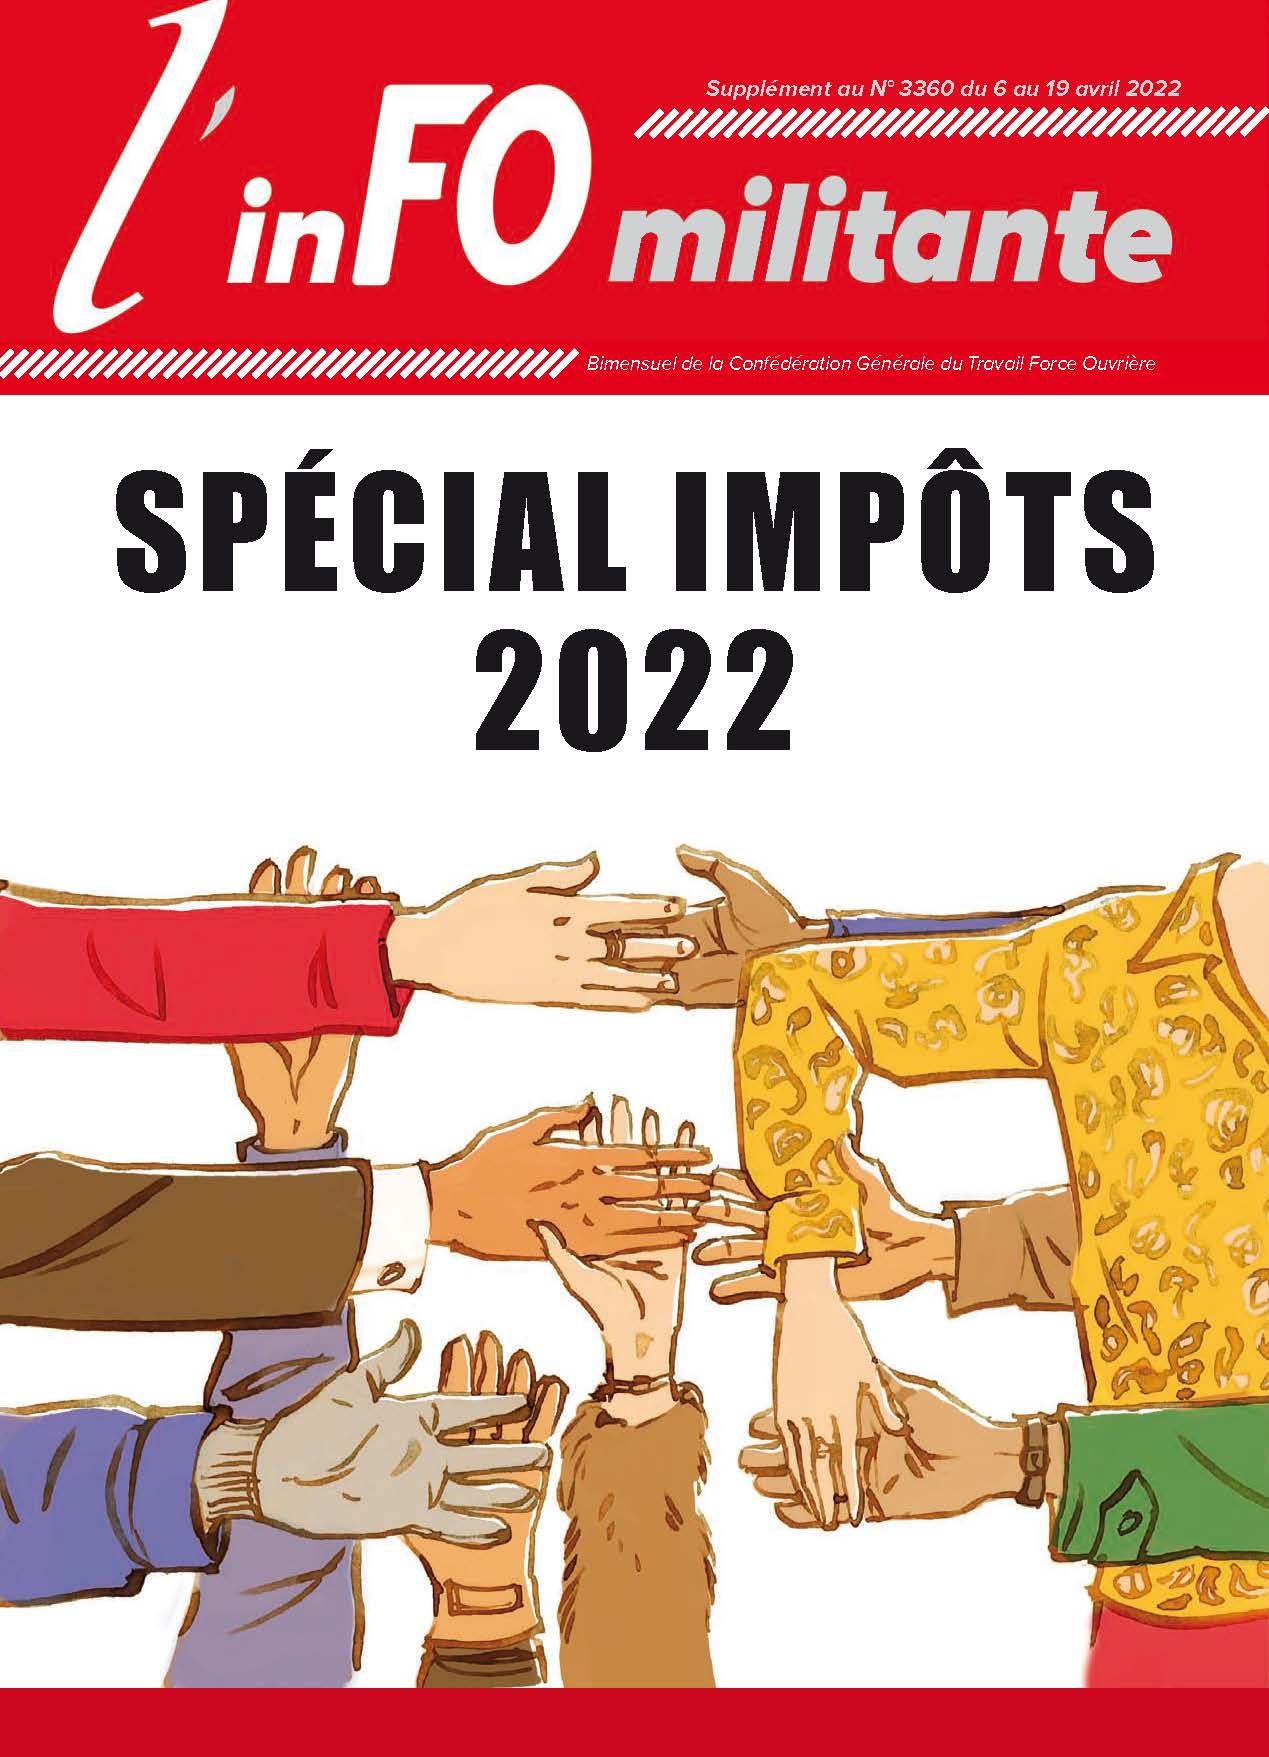 SPECIAL_IMPOTS_2022_PAGE_01.JPG